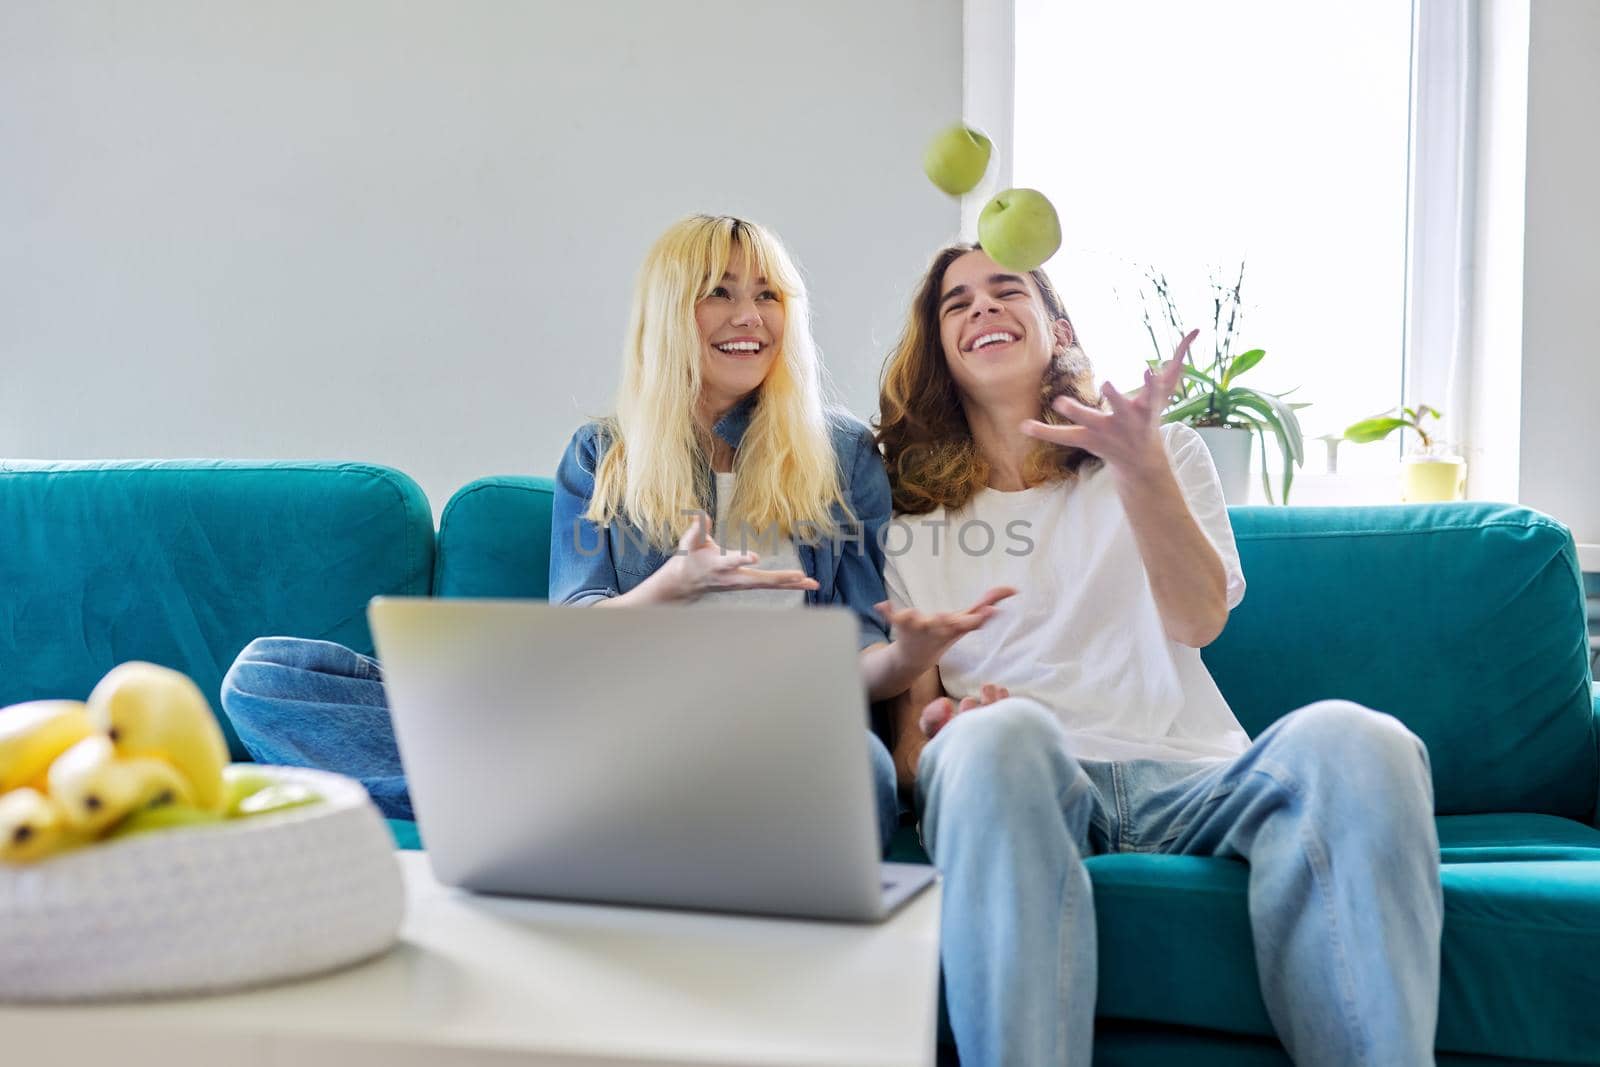 Laughing couple of teenagers having fun, sitting on couch, looking at laptop by VH-studio